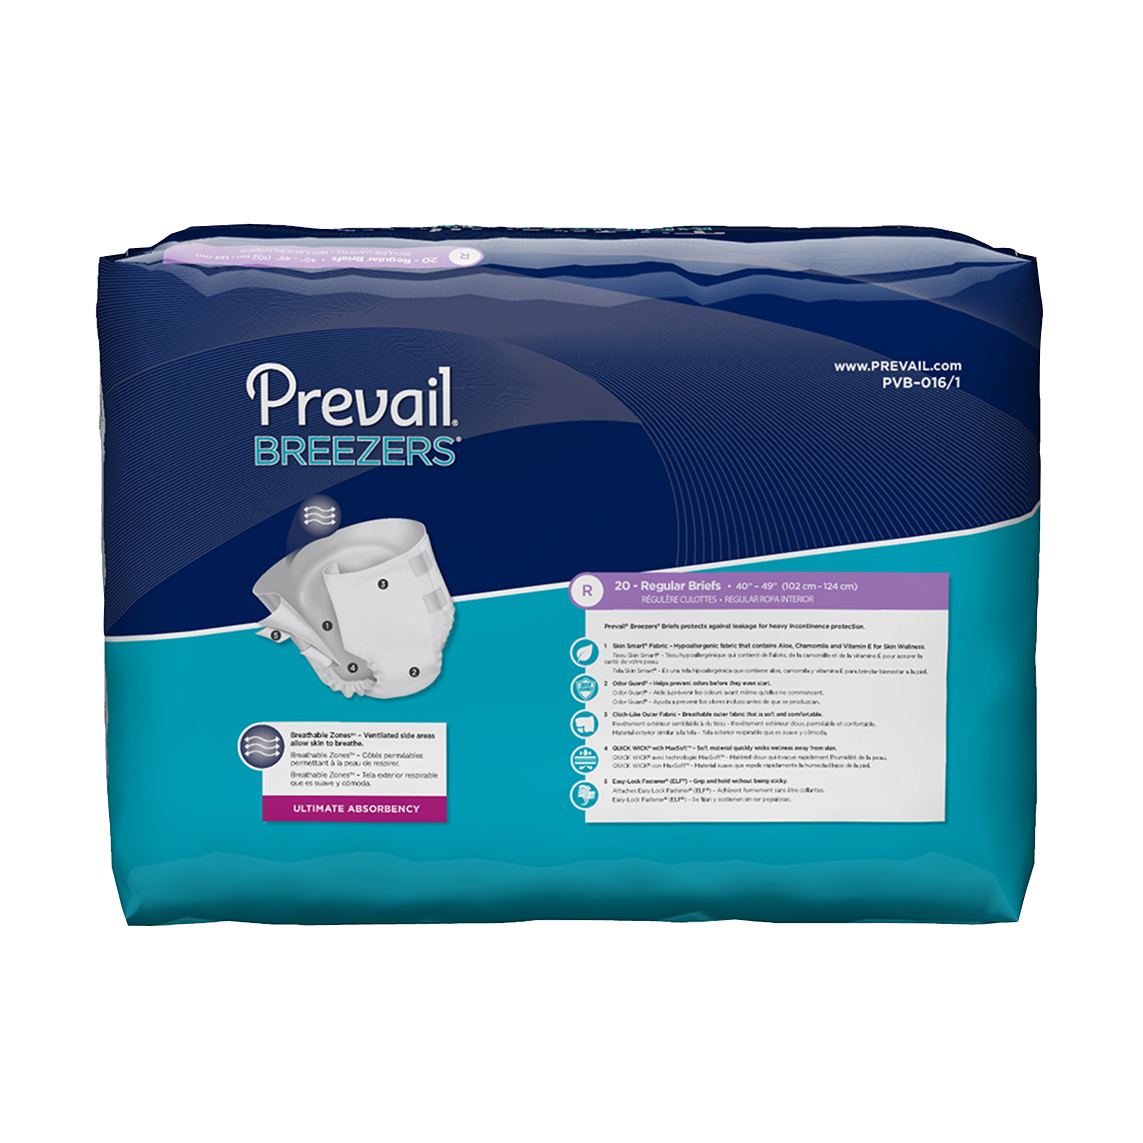 Prevail Extra Underwear With Skin Smart Fabric